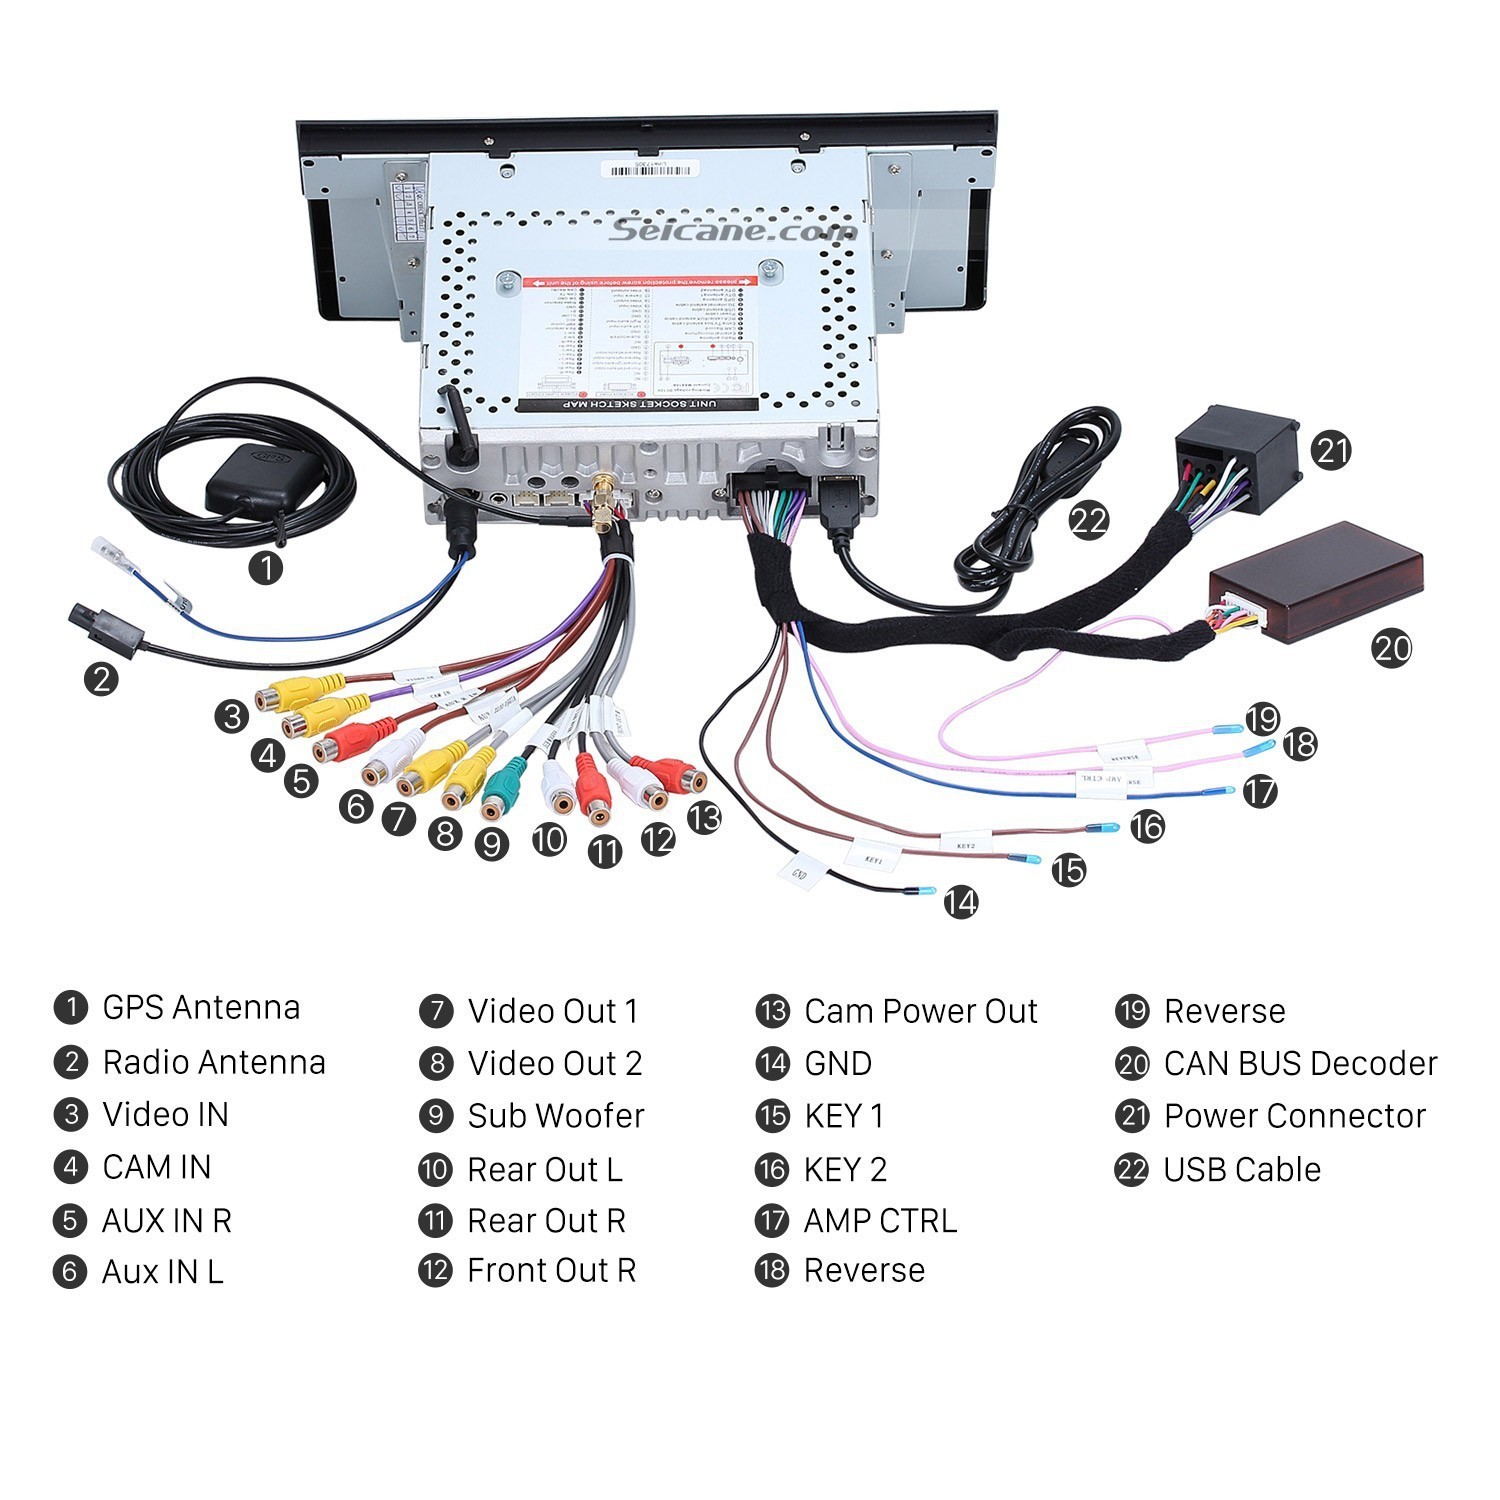 Wiring Diagrams for Cars Acura forums the Best Unique Steering Wheel Radio Controls Wiring Of Wiring Diagrams for Cars